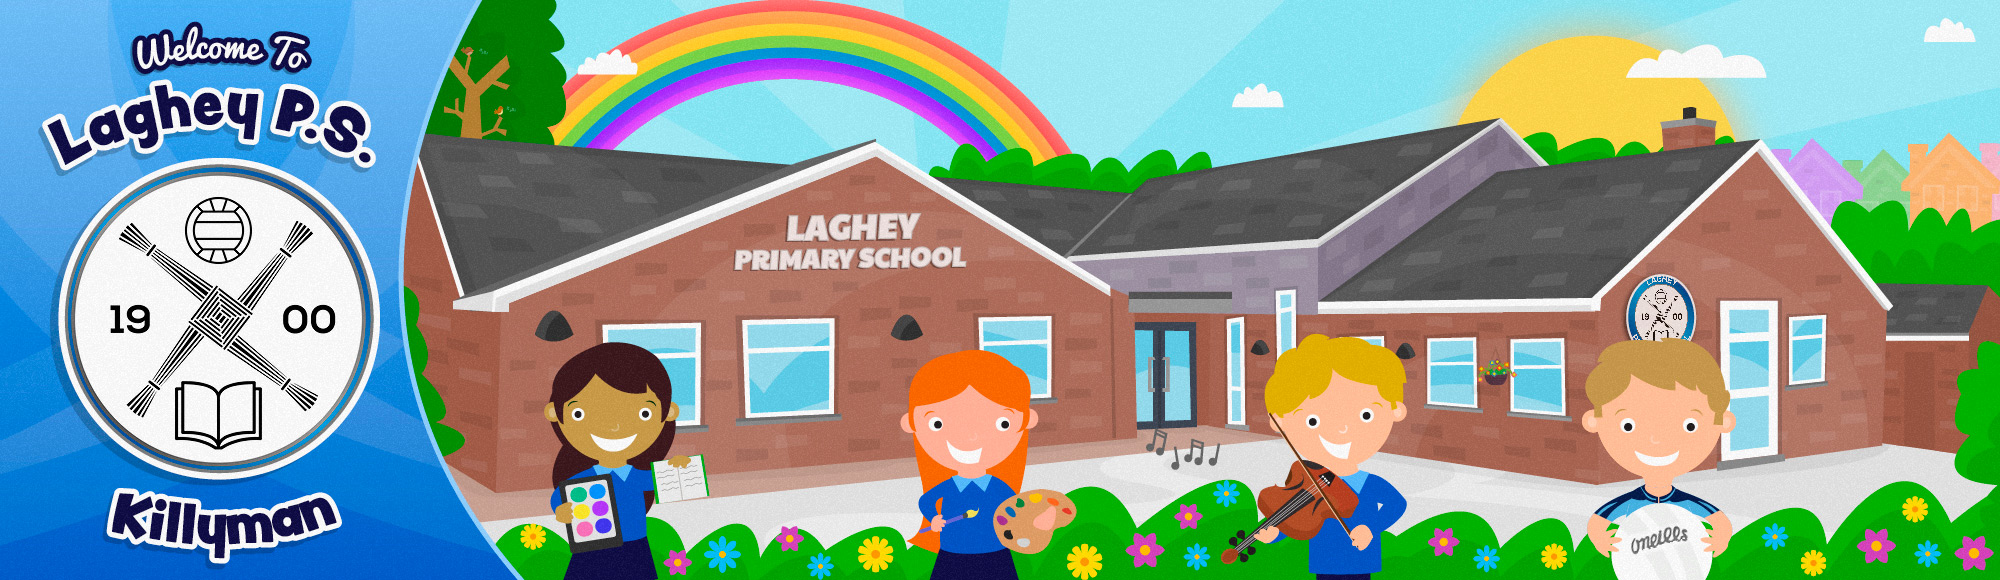 Laghey Primary School, Dungannon, Co.Tyrone